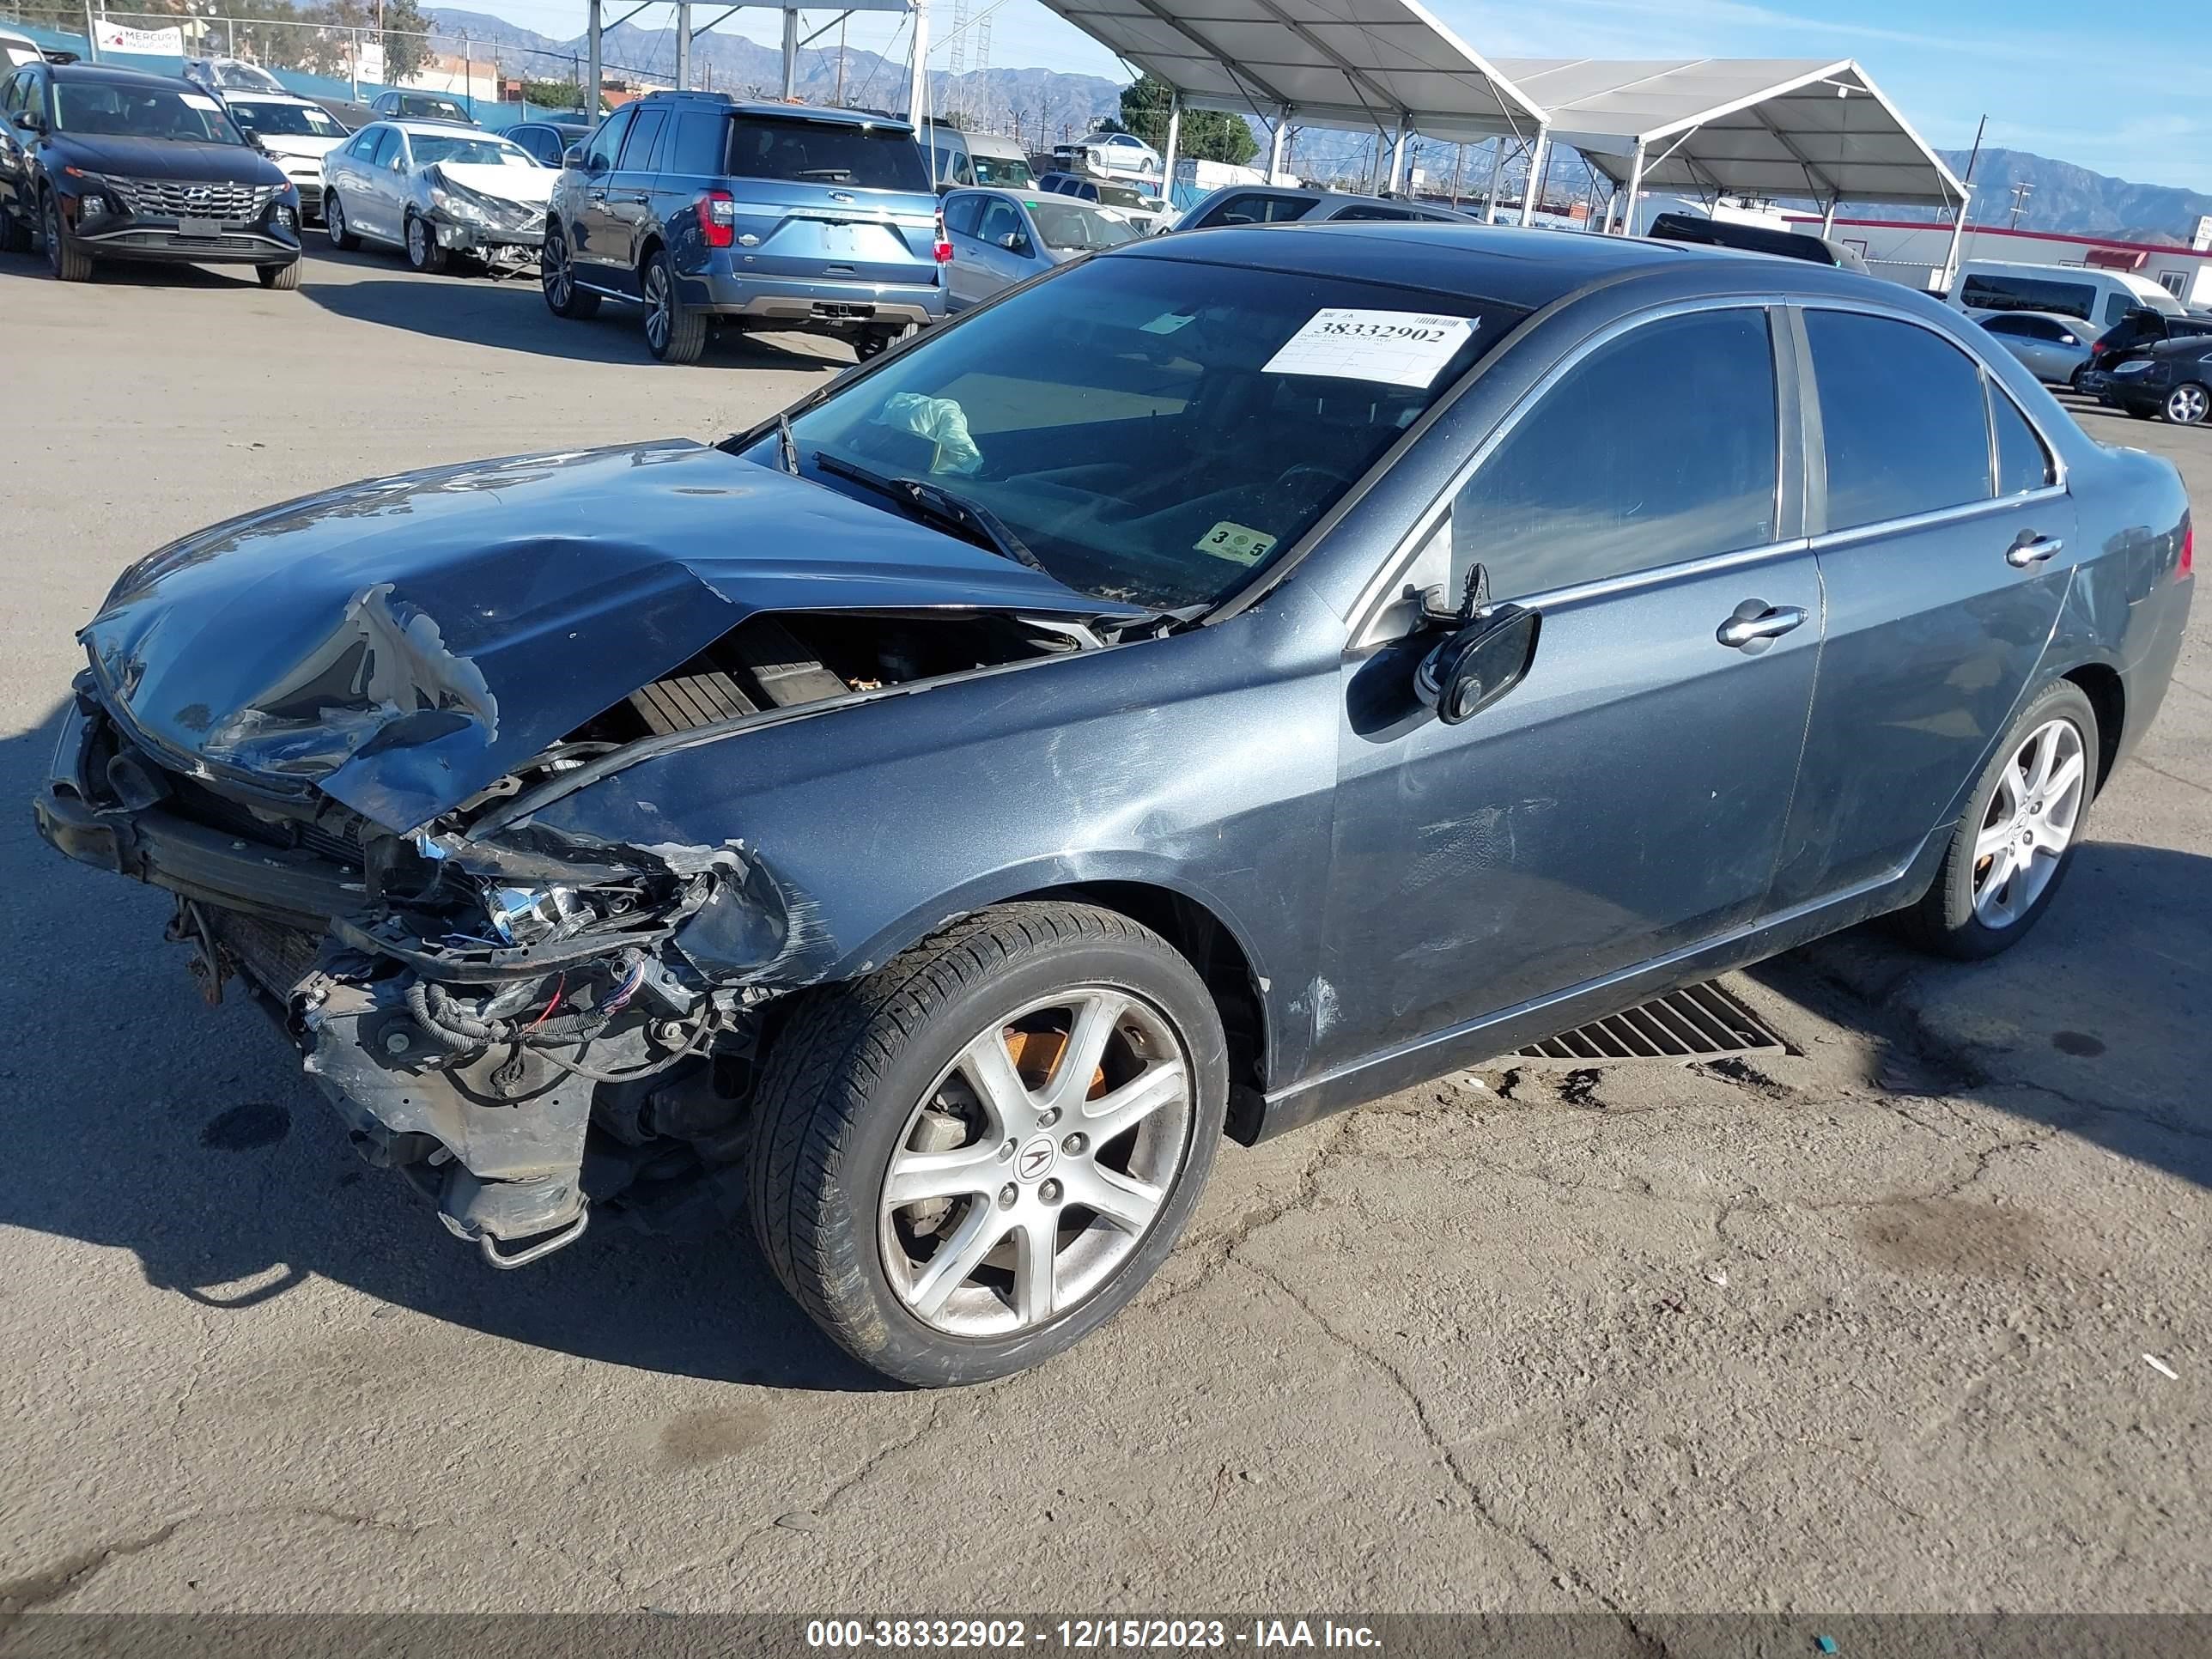 JH4CL96875C034172  - ACURA TSX  2005 IMG - 1